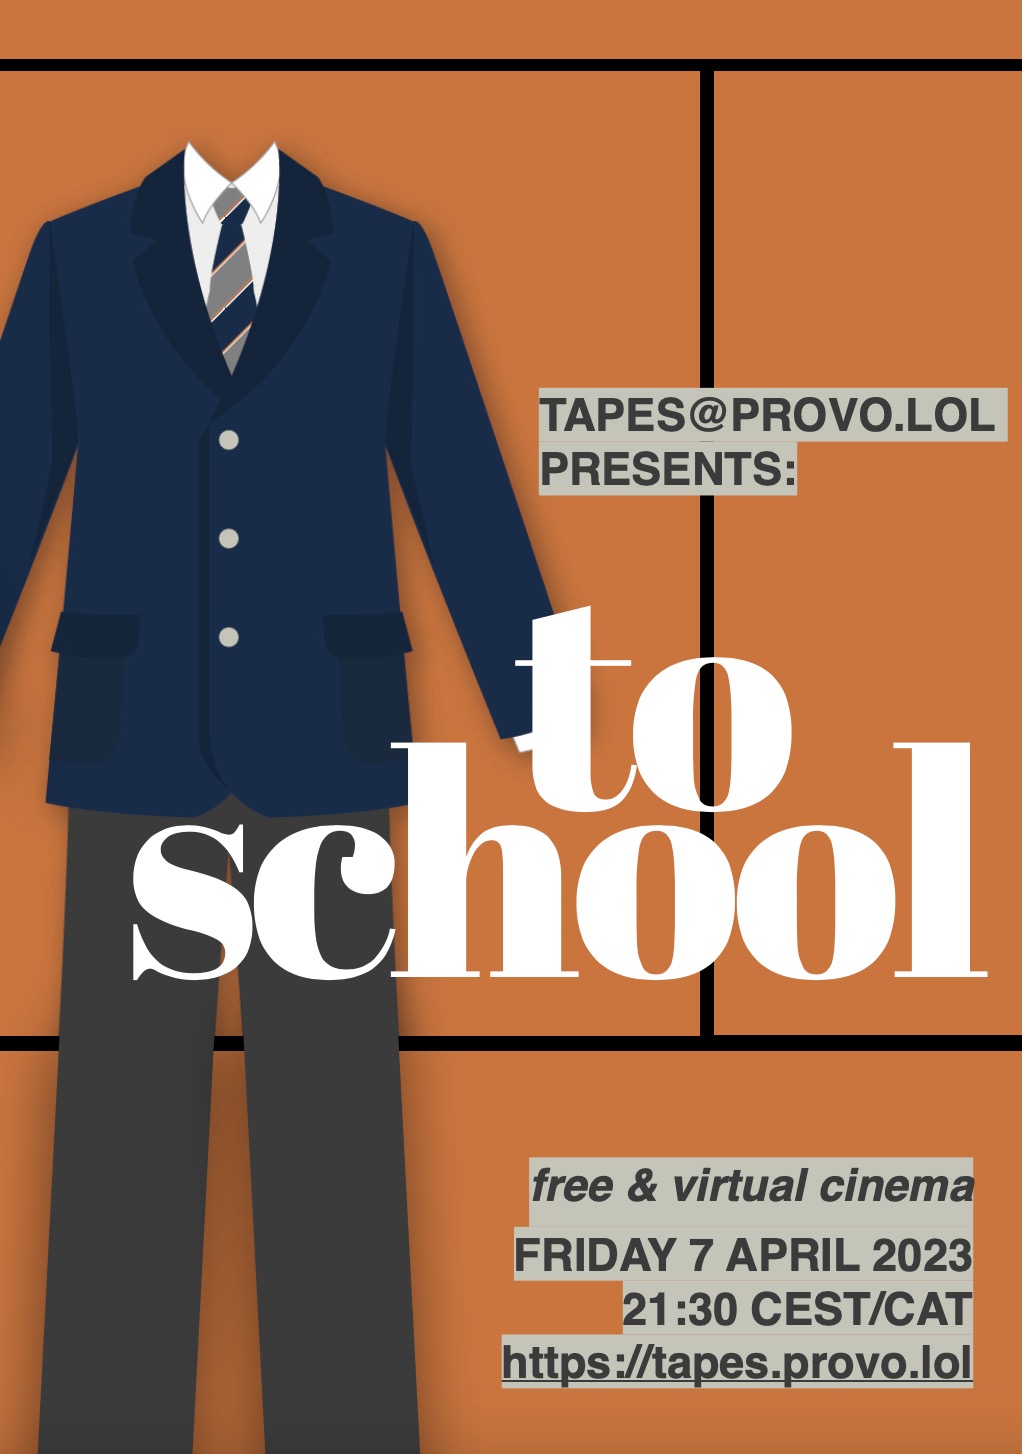 Flyer of the &rsquo;to school&rsquo; film night